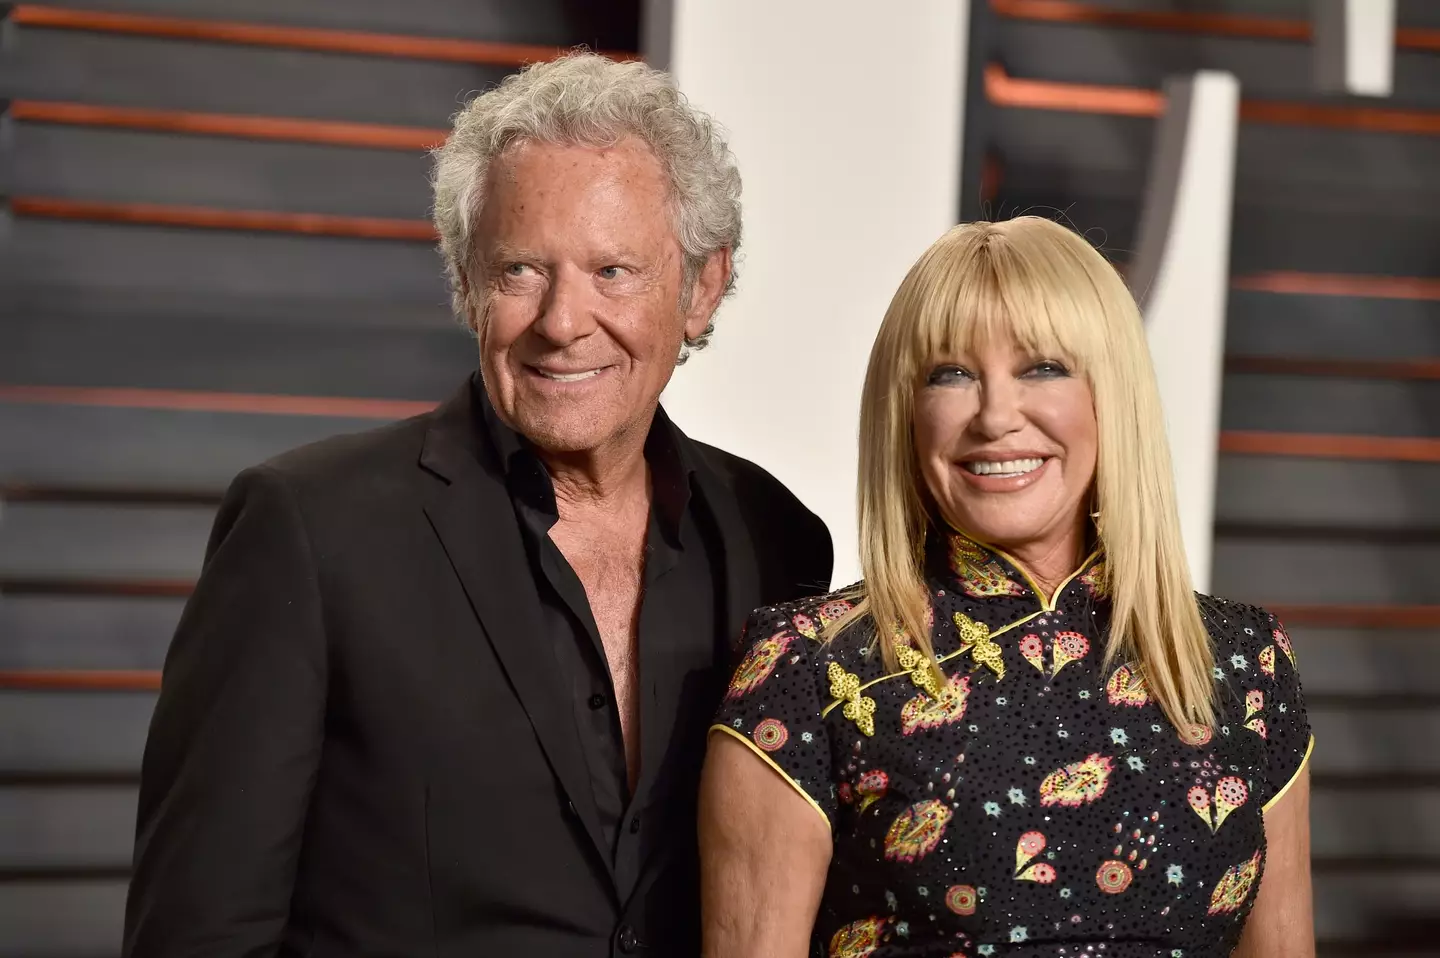 Suzanne Somers has passed away aged 76.